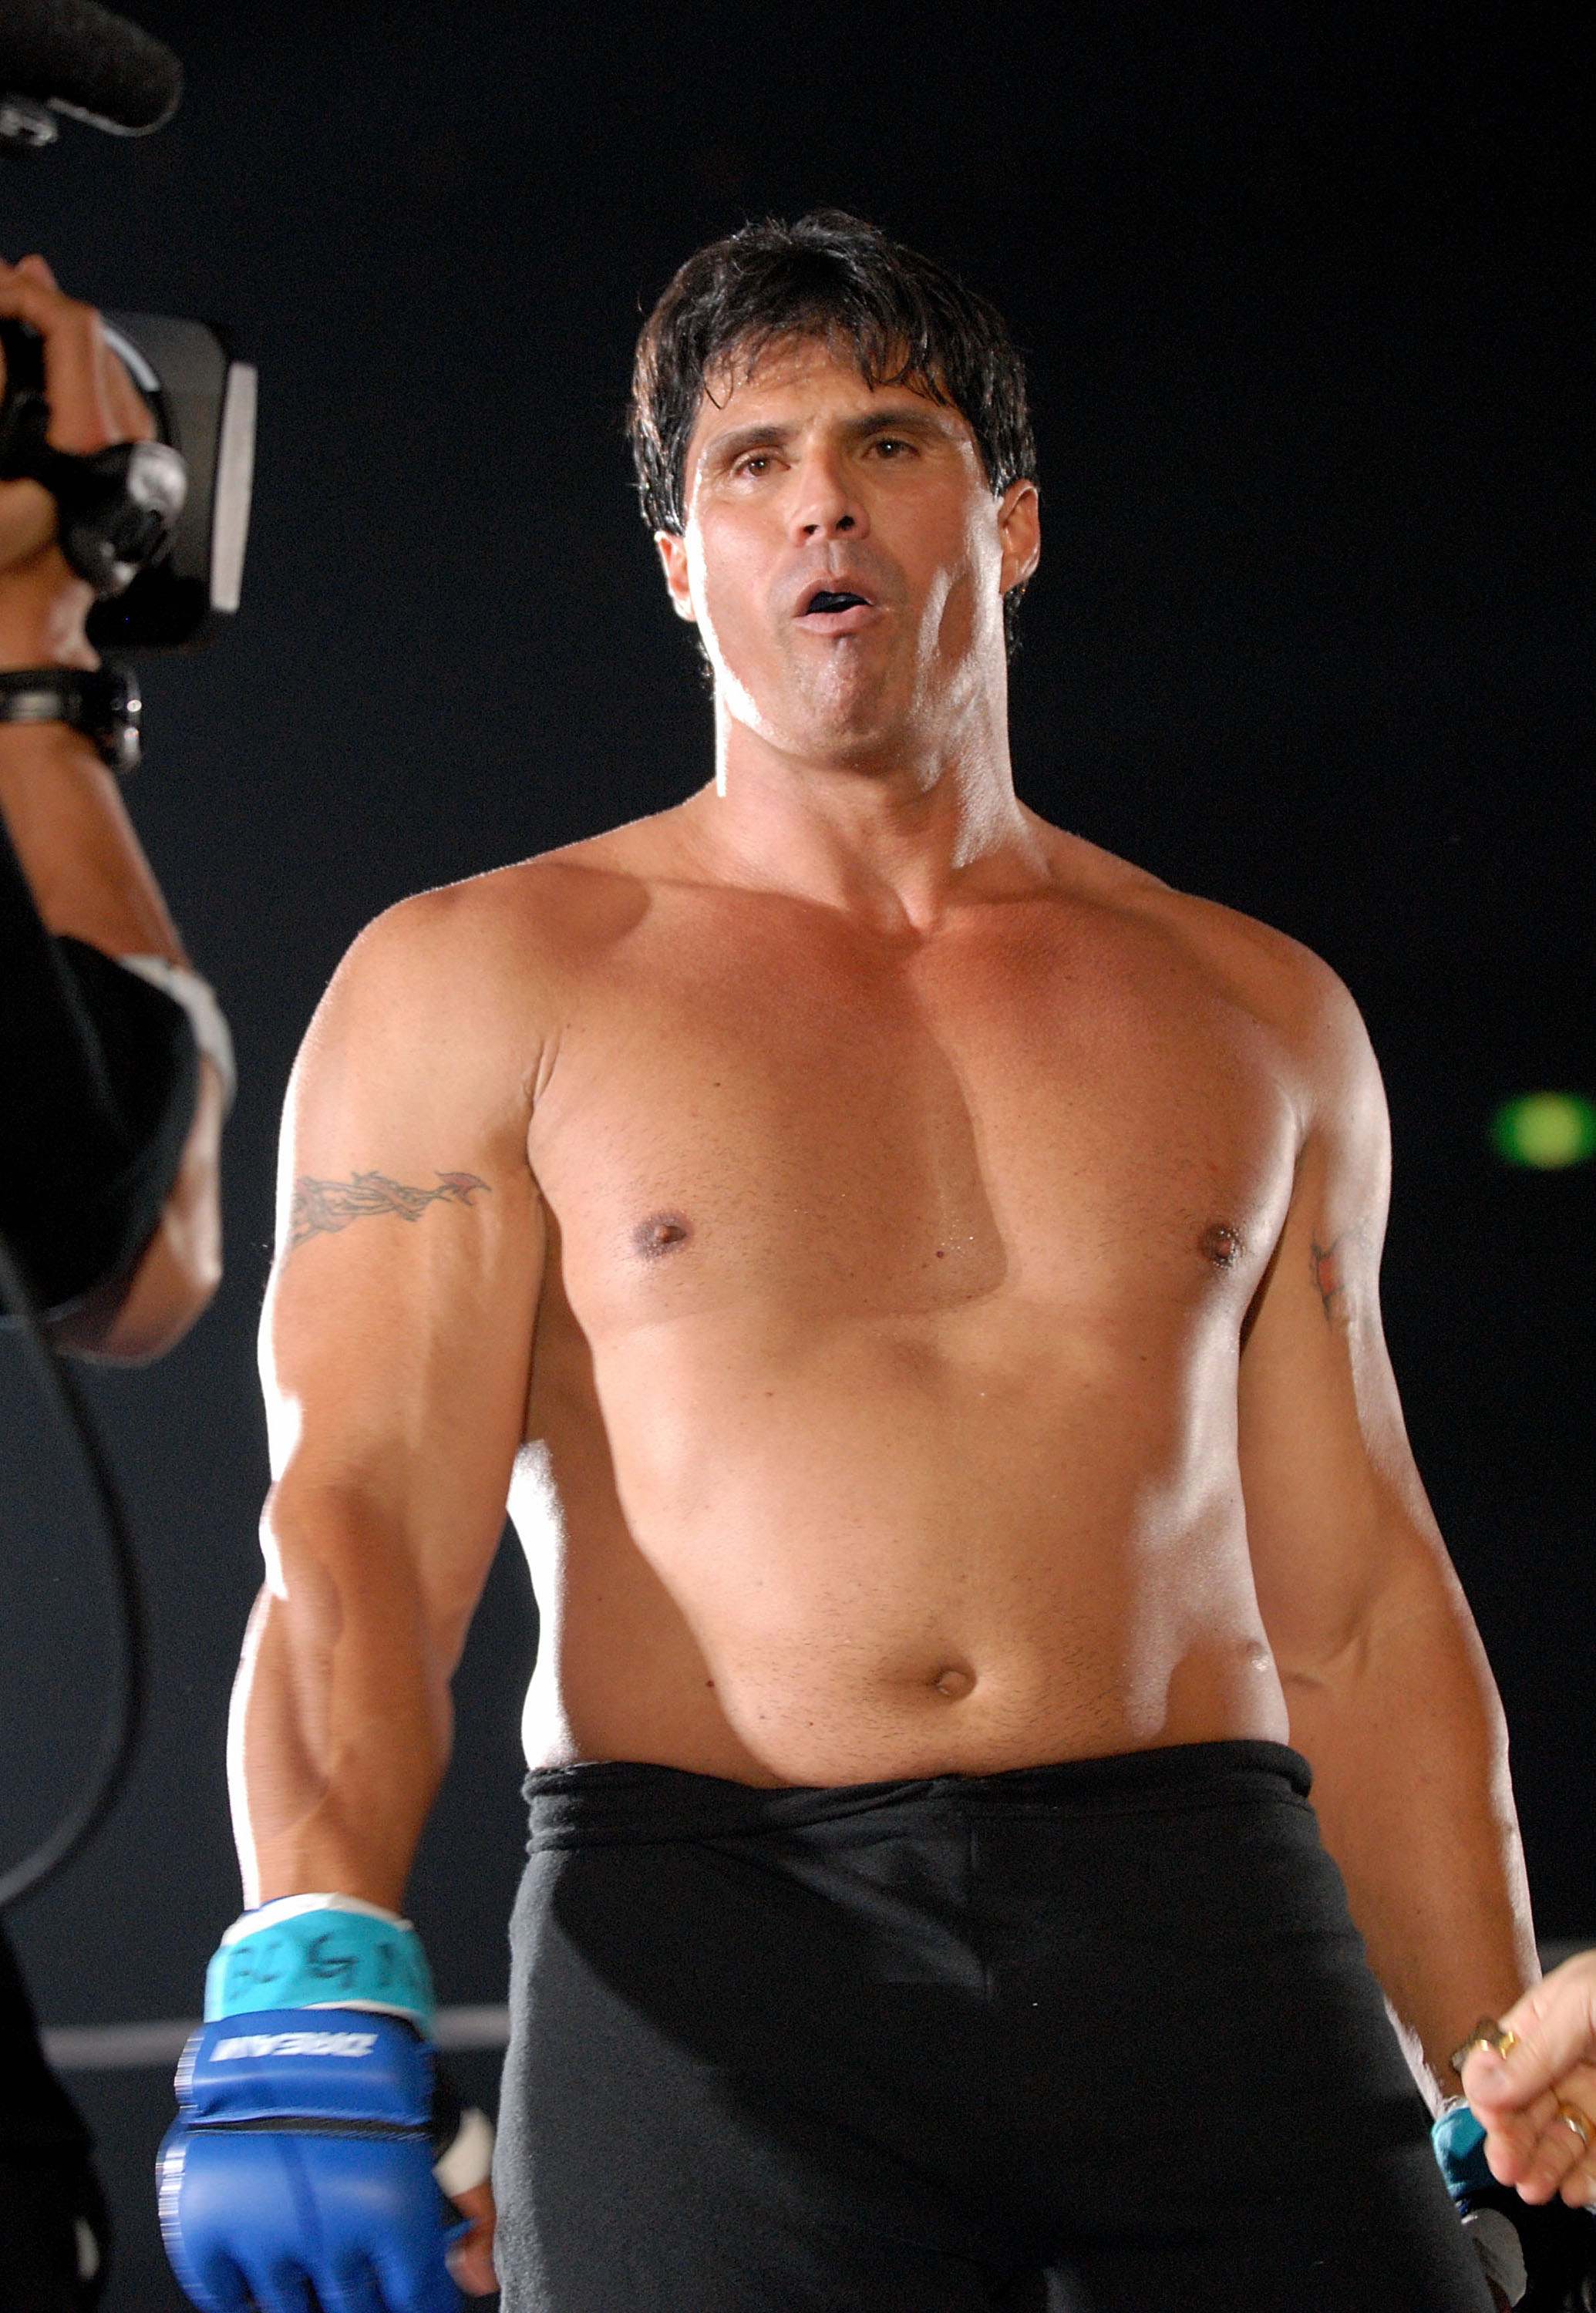  The Jose Canseco Site